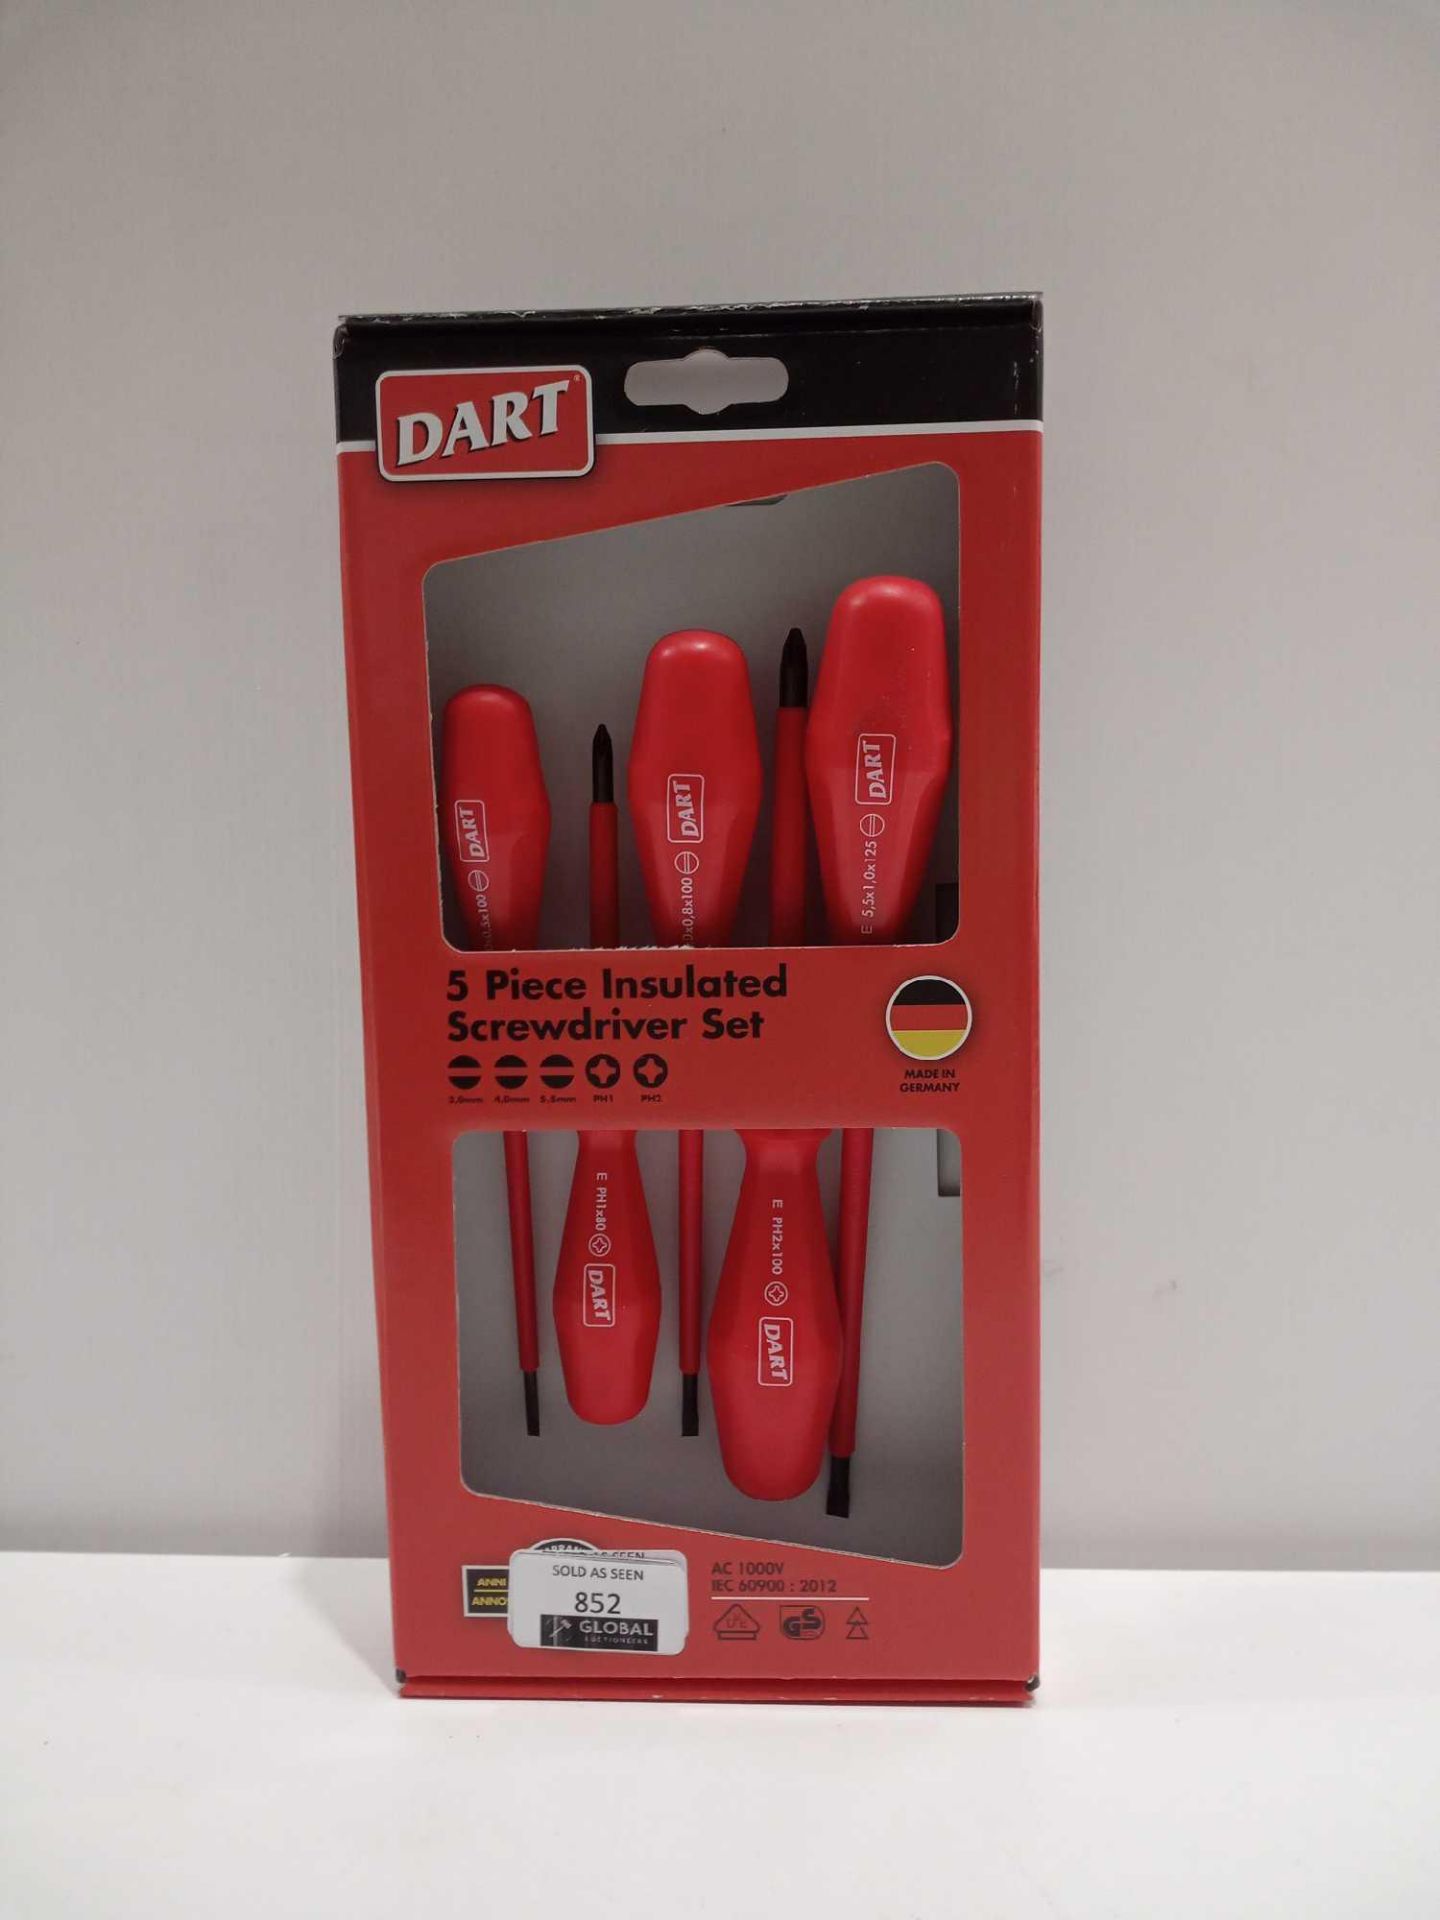 Combined RRP £120.Lot To Contain 4 Brand New 5 Piece Insulated Screwdriver Sets